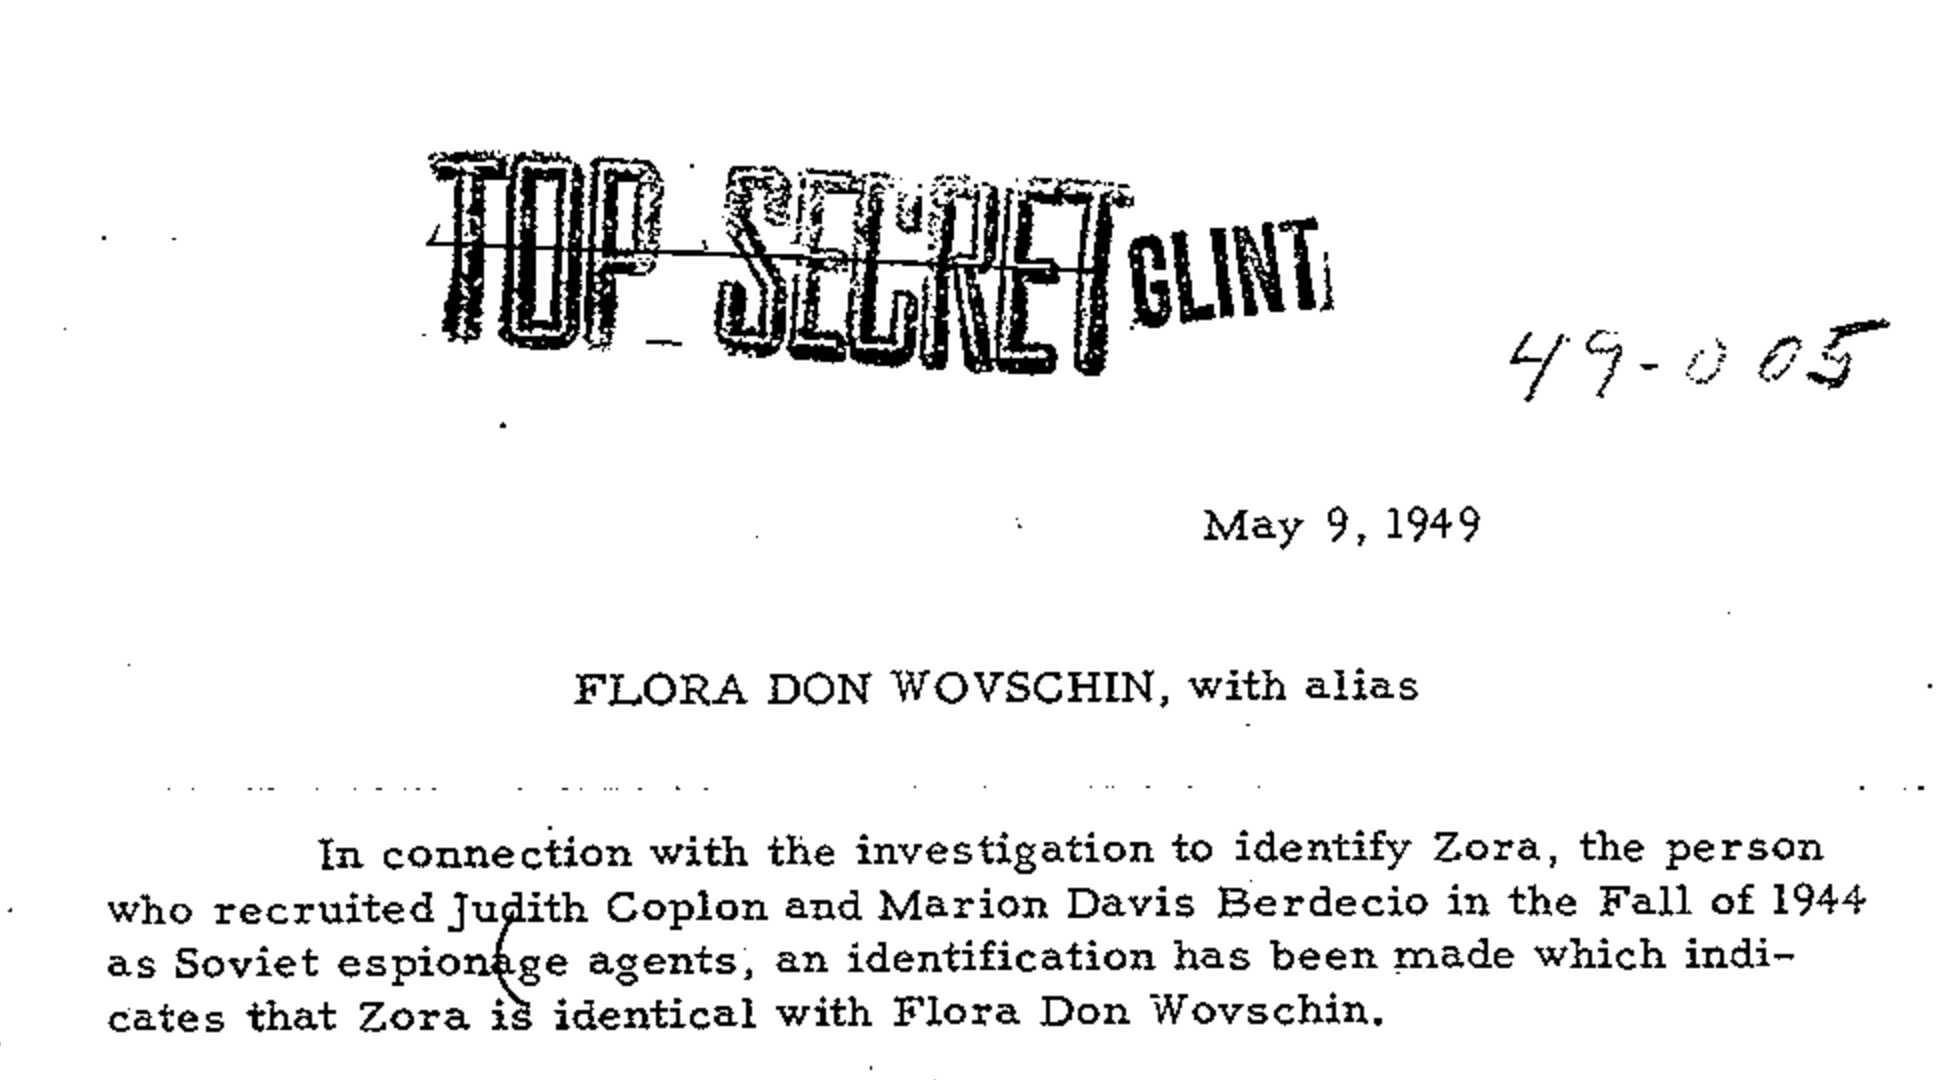 HISTORY Flora Wovschin — Codename ZORA — Was The Most Active Soviet Spy But Not The Most Valuable Agent of Influence at WWII Voice of America